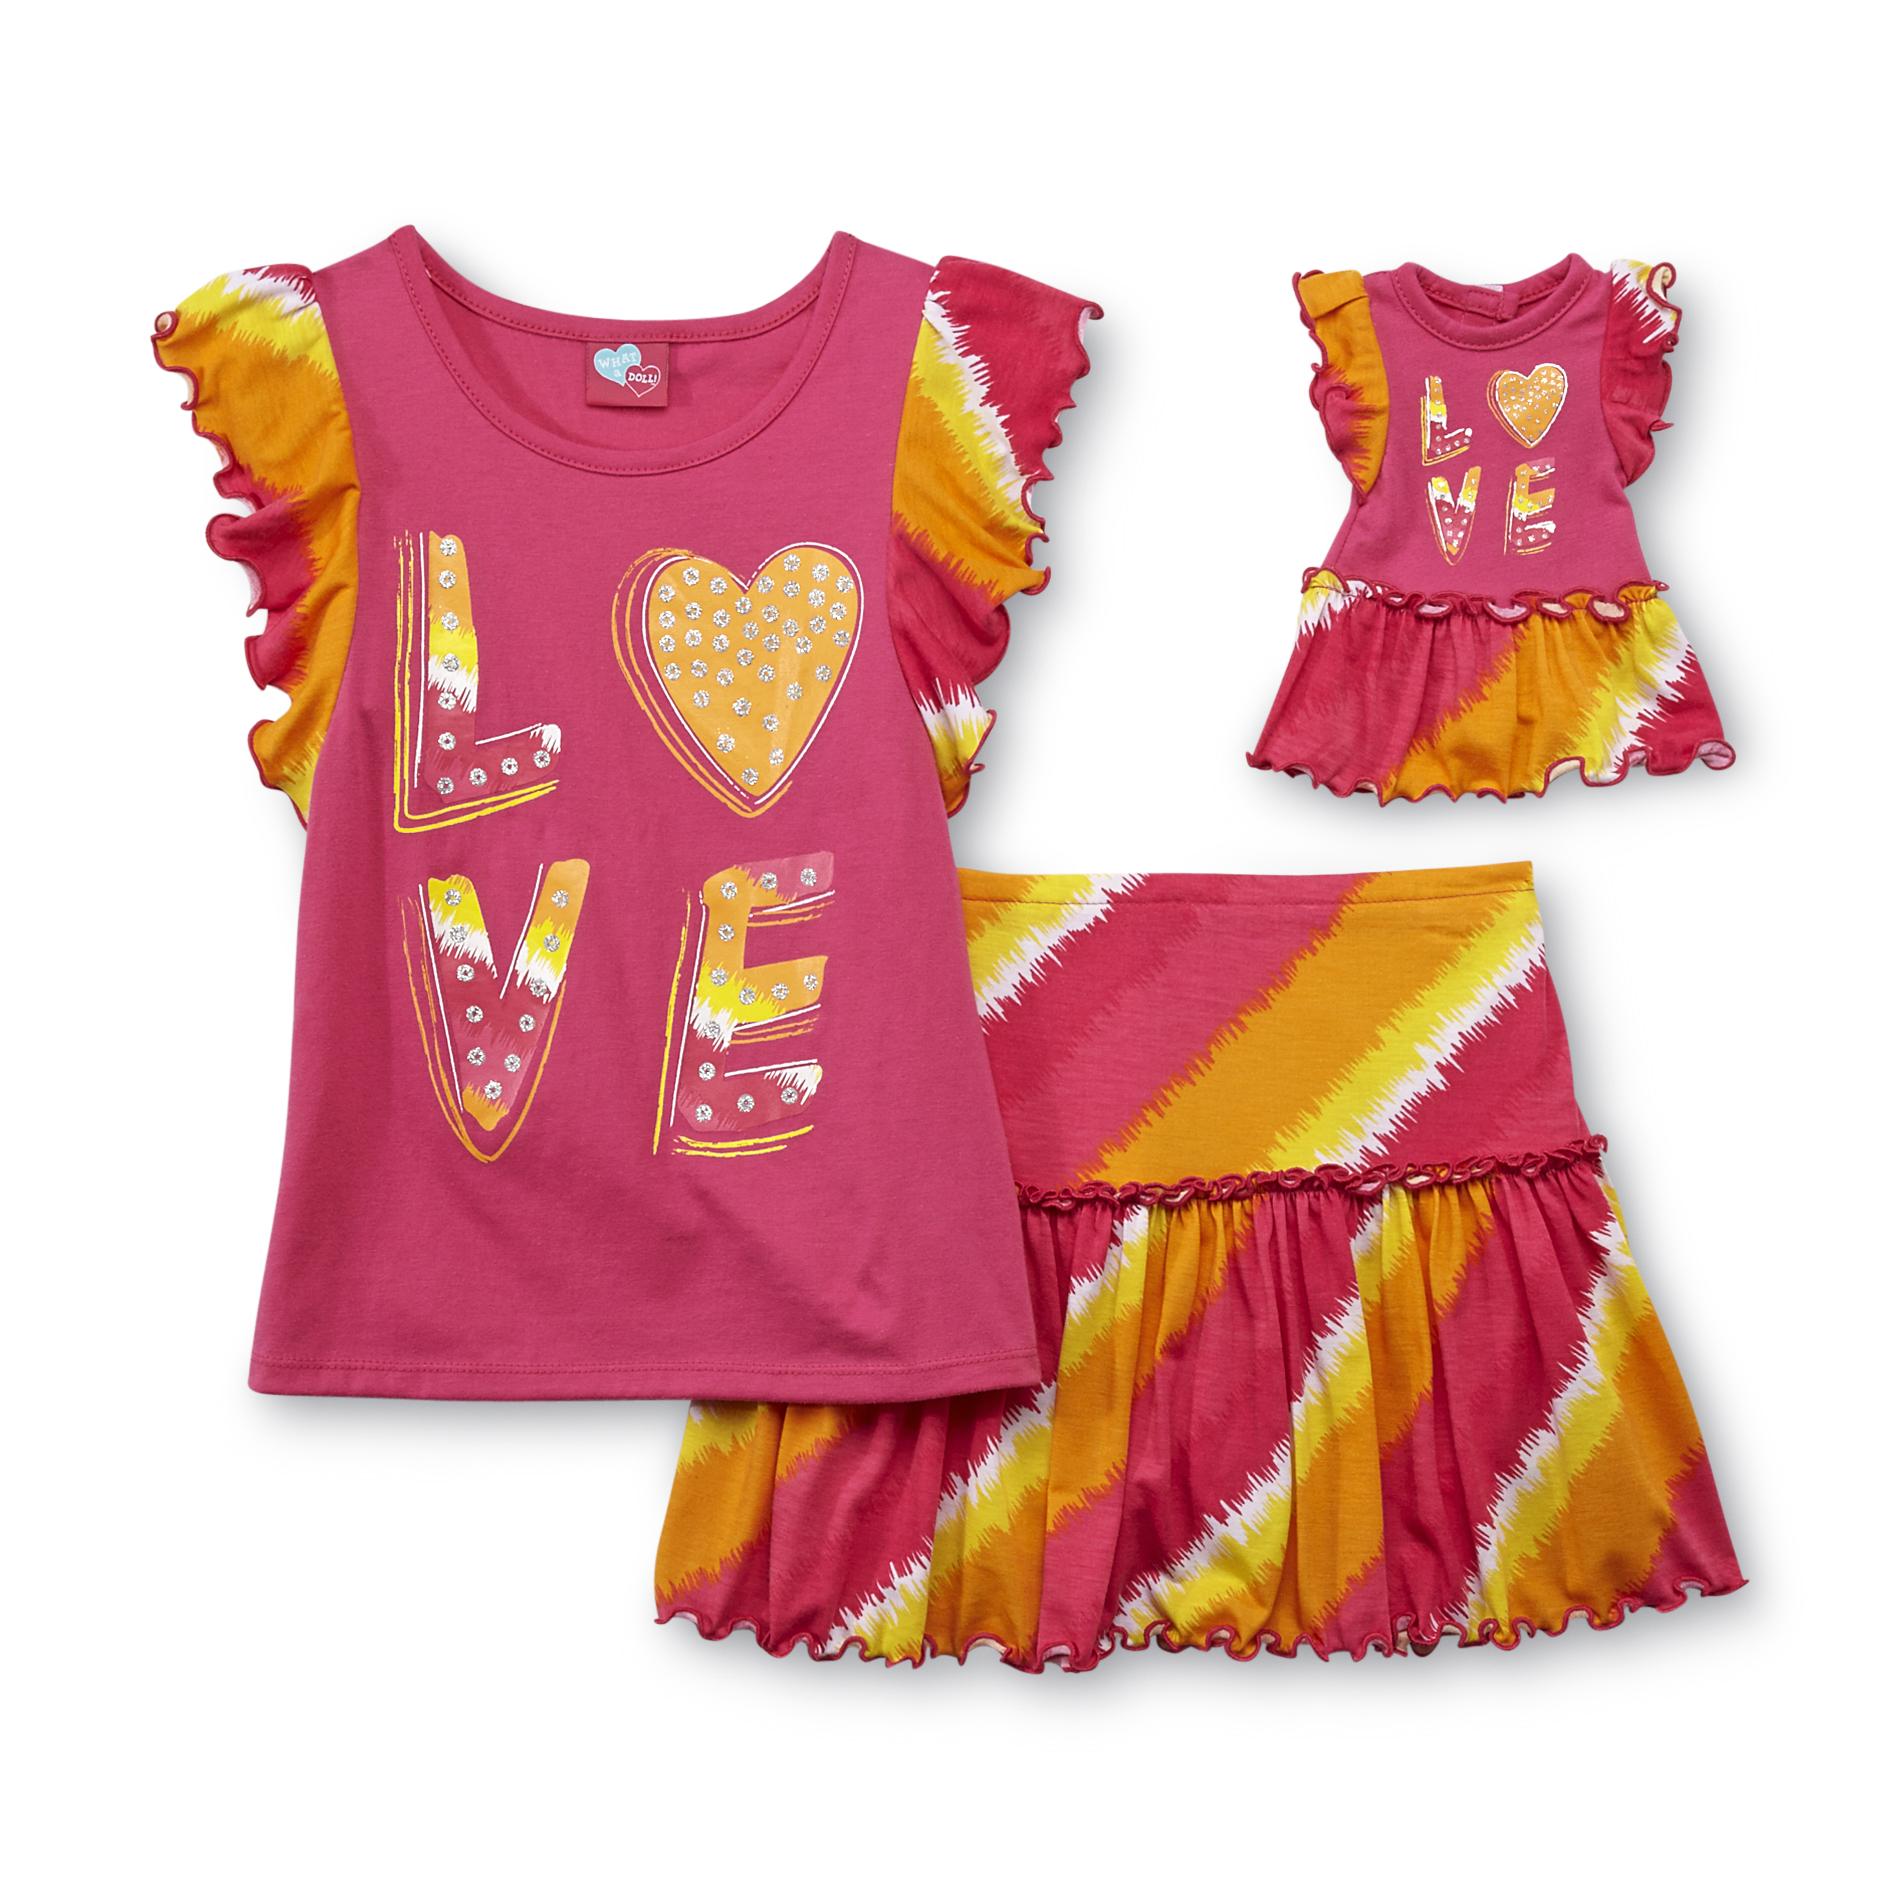 What A Doll Girl's Graphic T-shirt  Skirt & Doll Outfit - Love